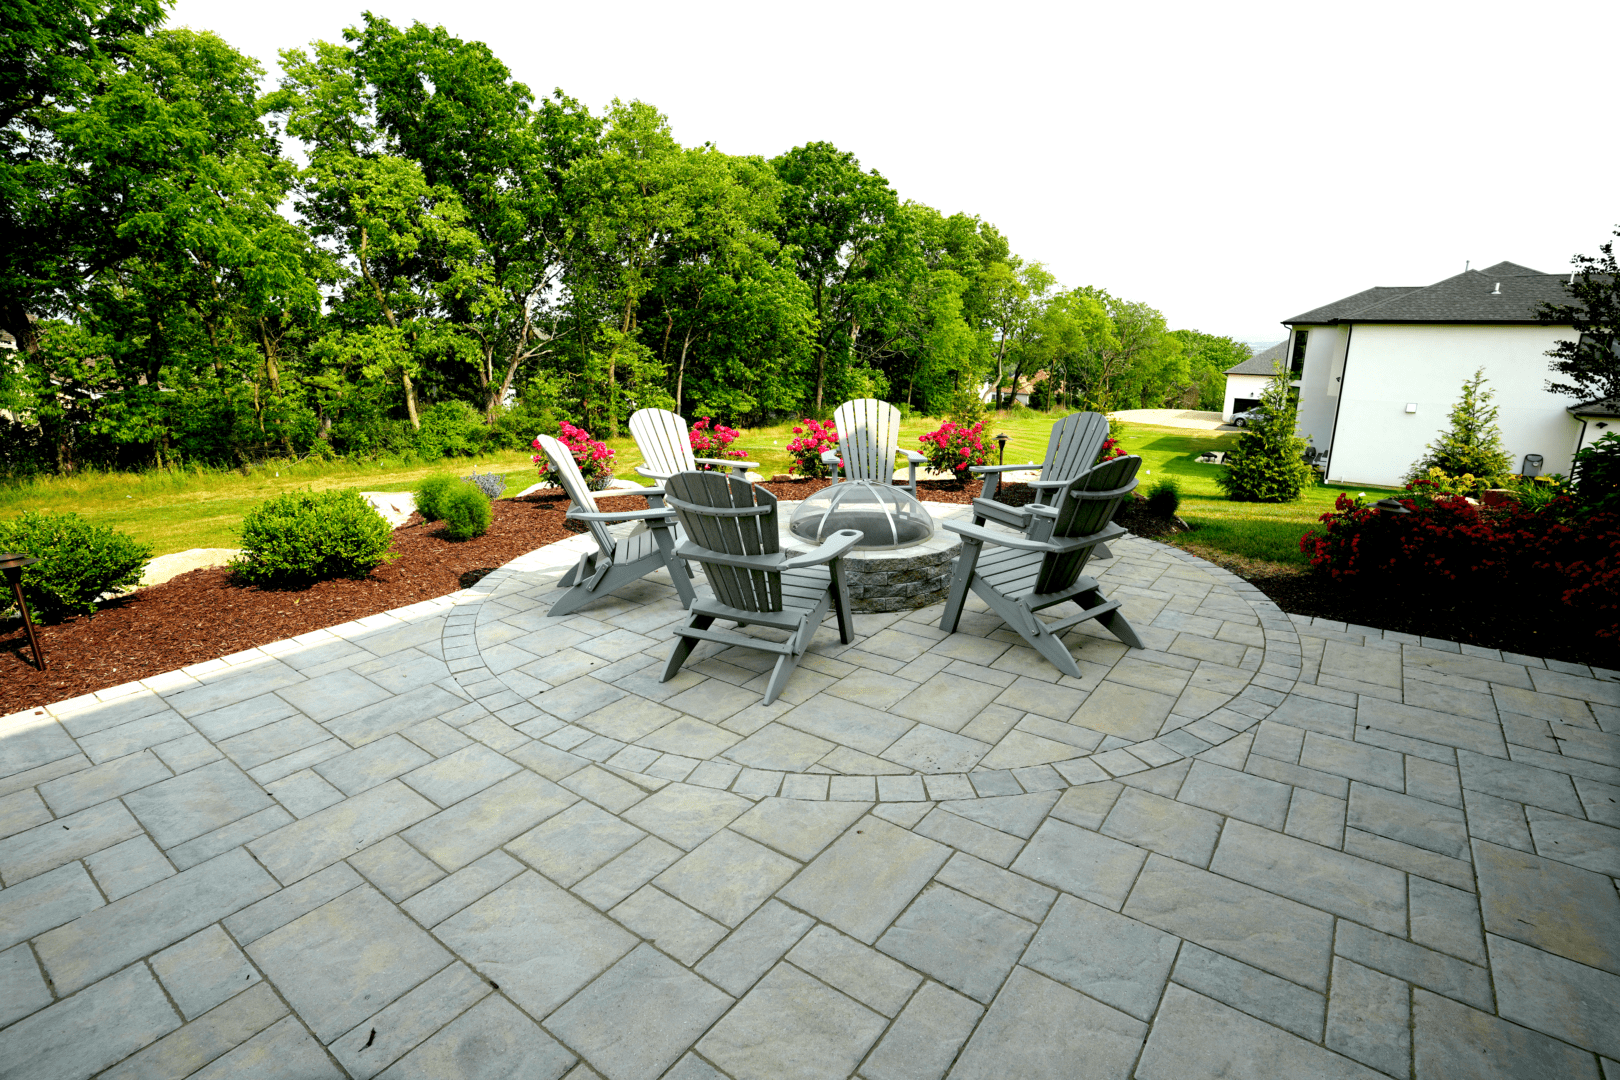 A picturesque landscape design featuring a patio adorned with comfortable chairs surrounding a mesmerizing fire pit.